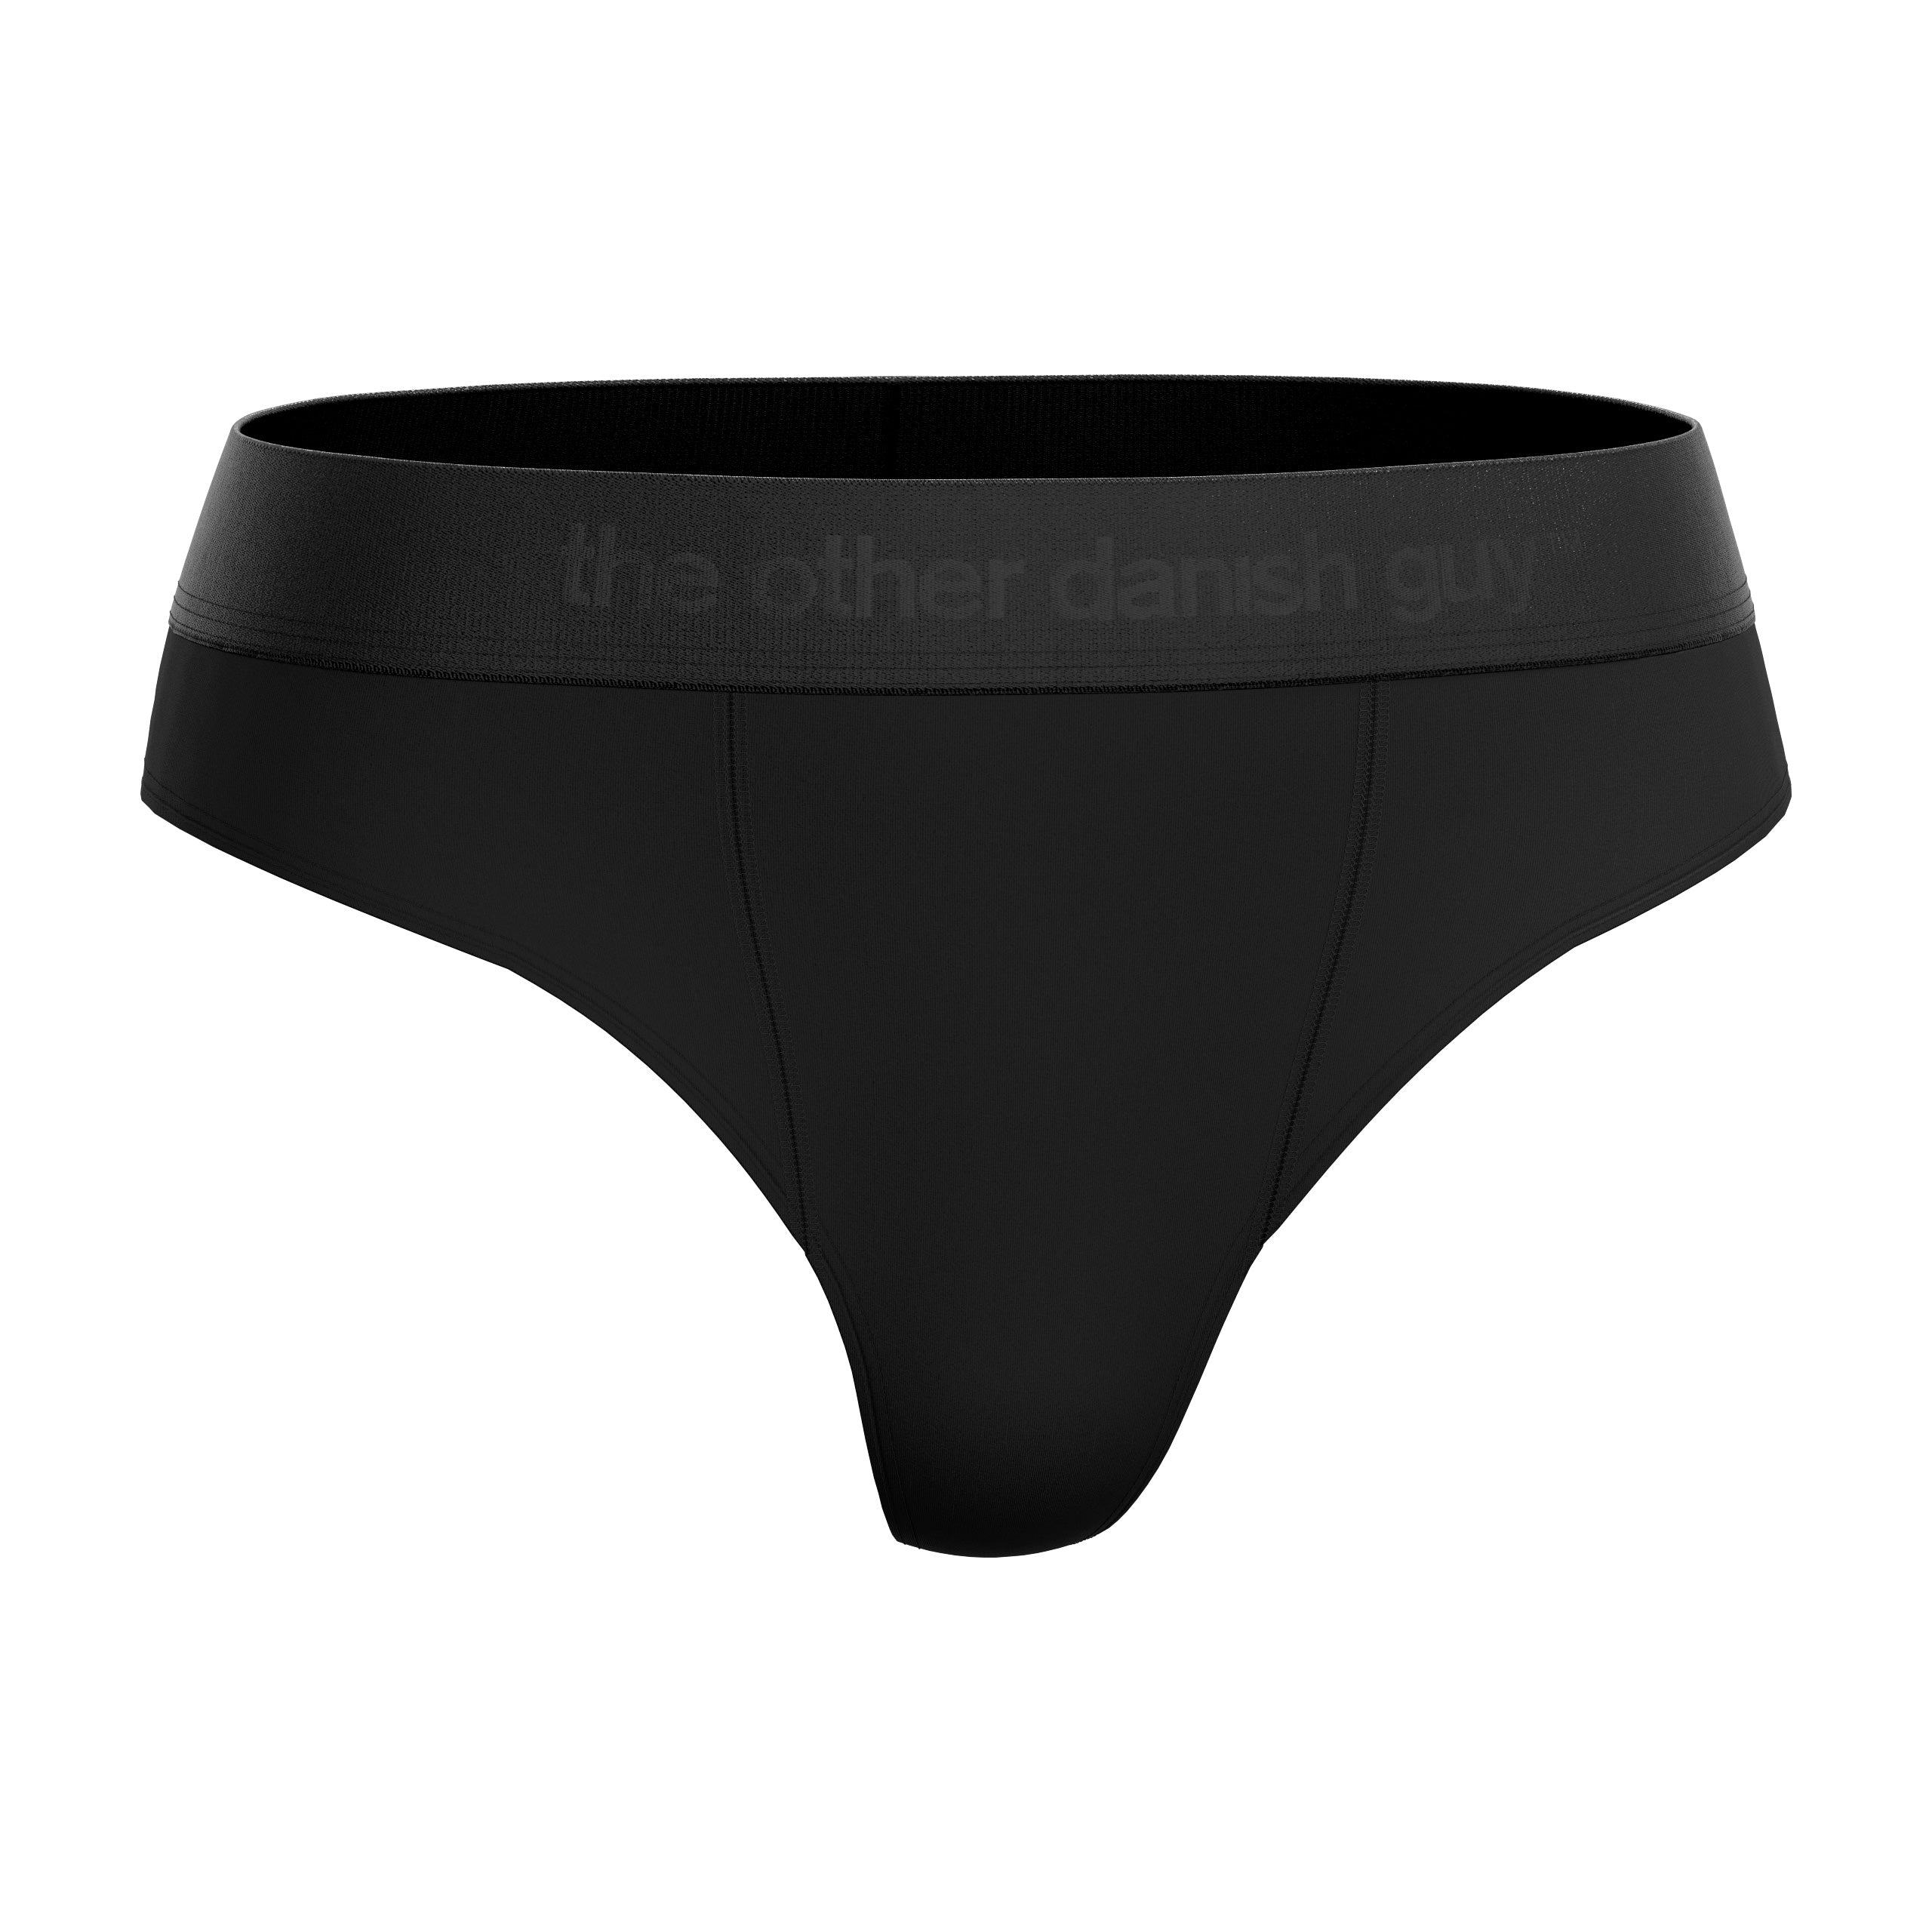 FREECULTR - Typically, there are two types of men in the world: the ones  who wear underwear and the ones who don't. The third category is a  lesser-known, yet the one that